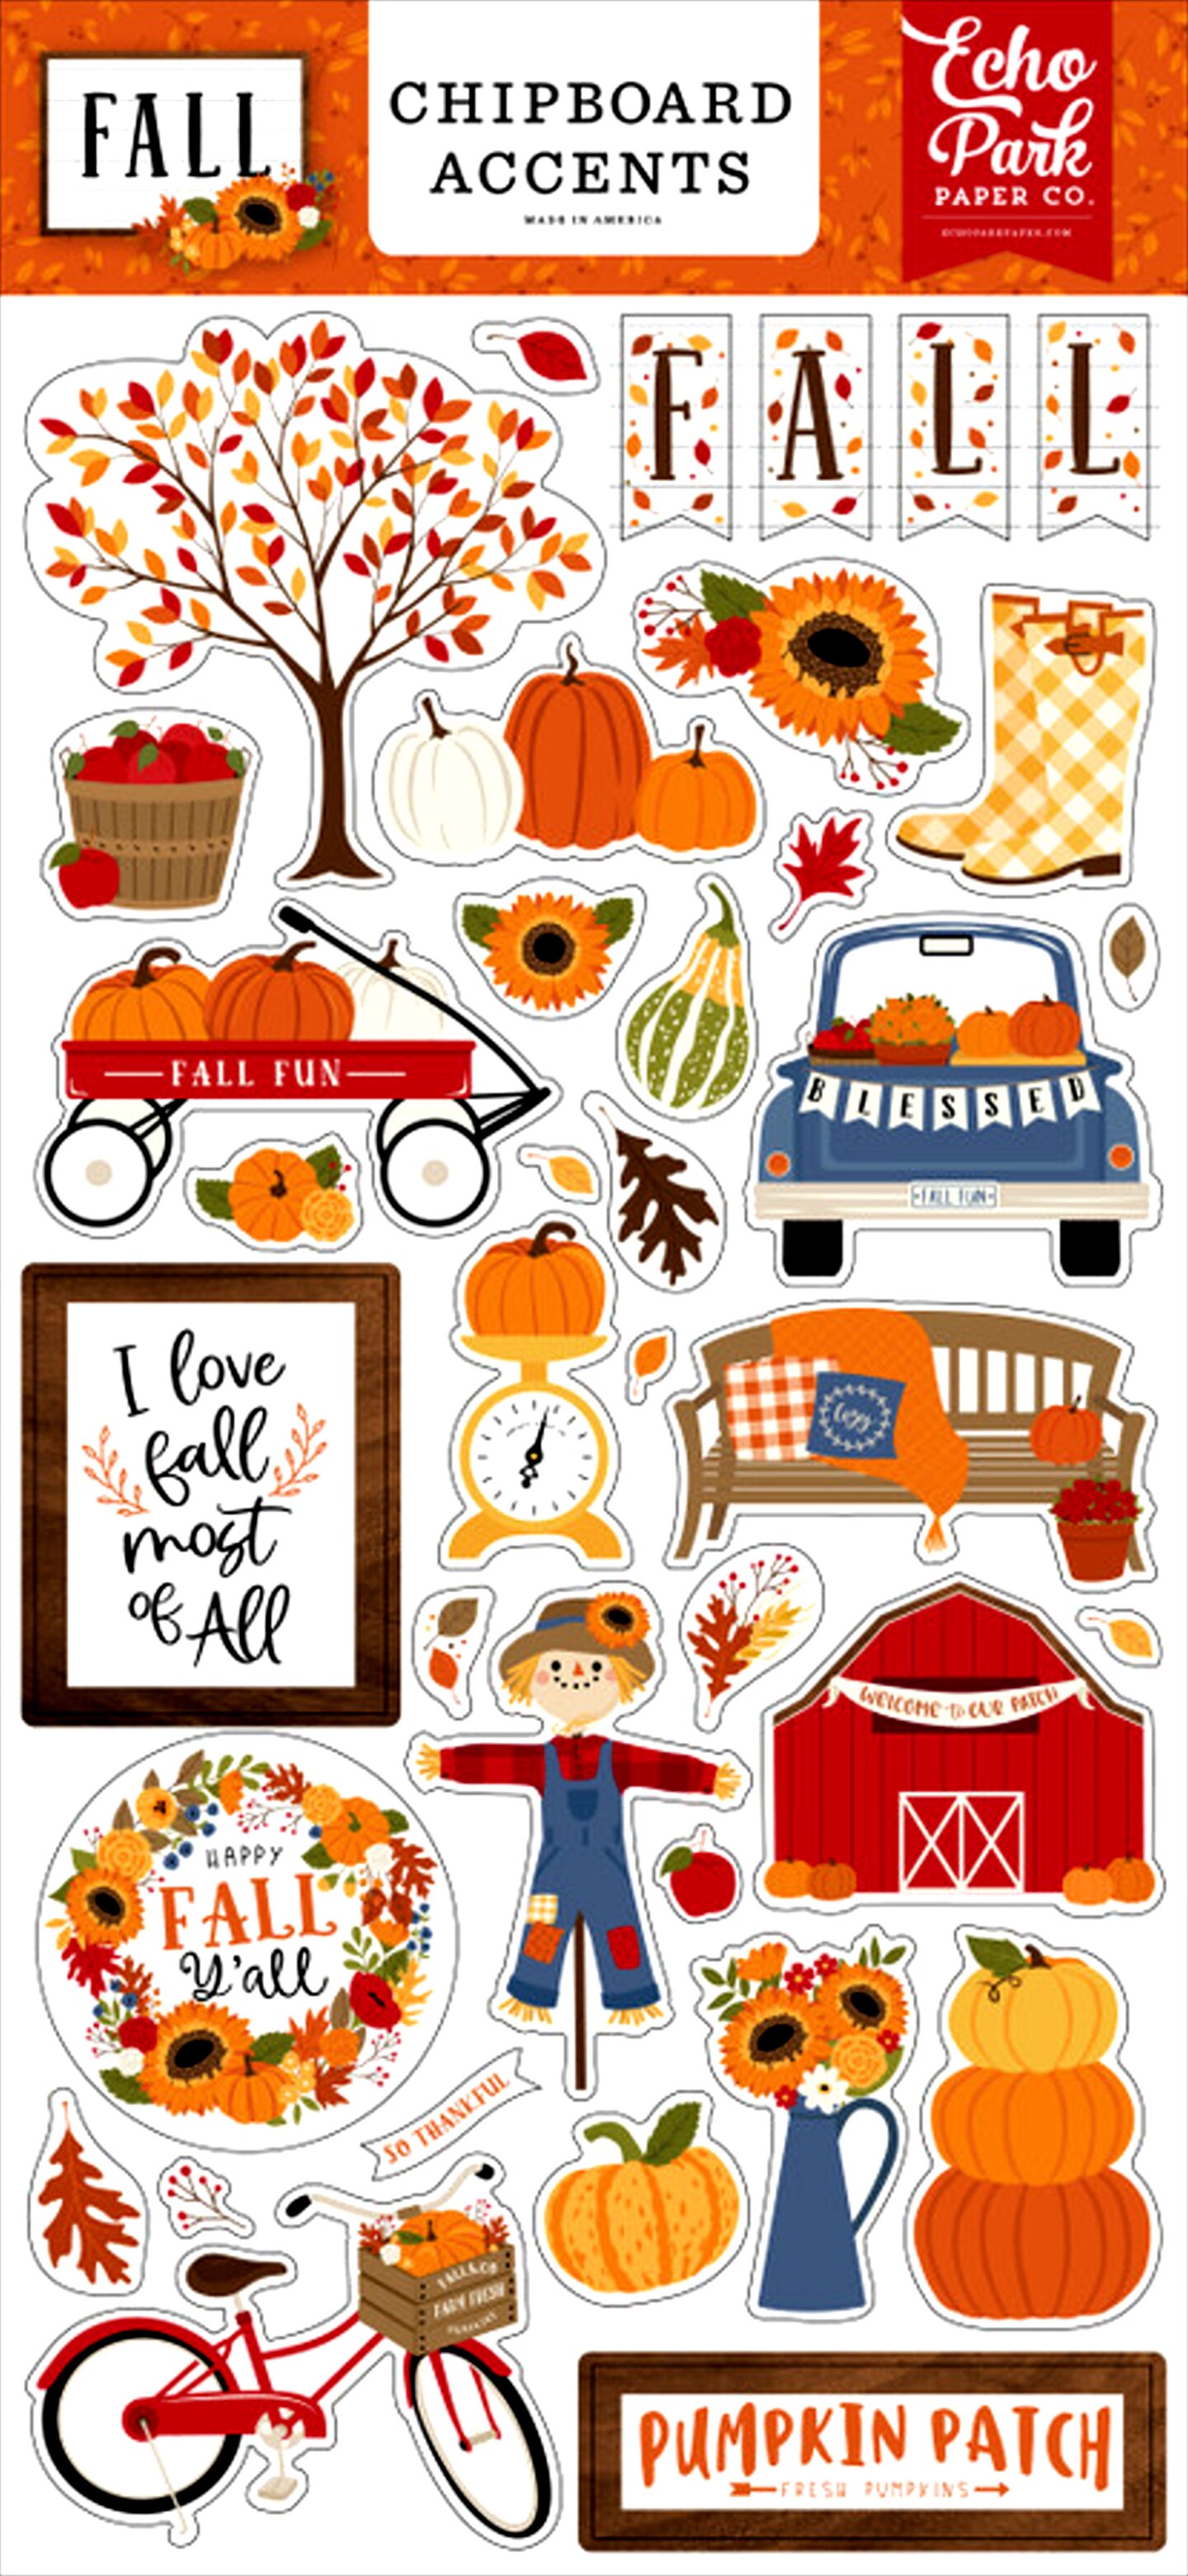 Echo Park Fall Chipboard Accents